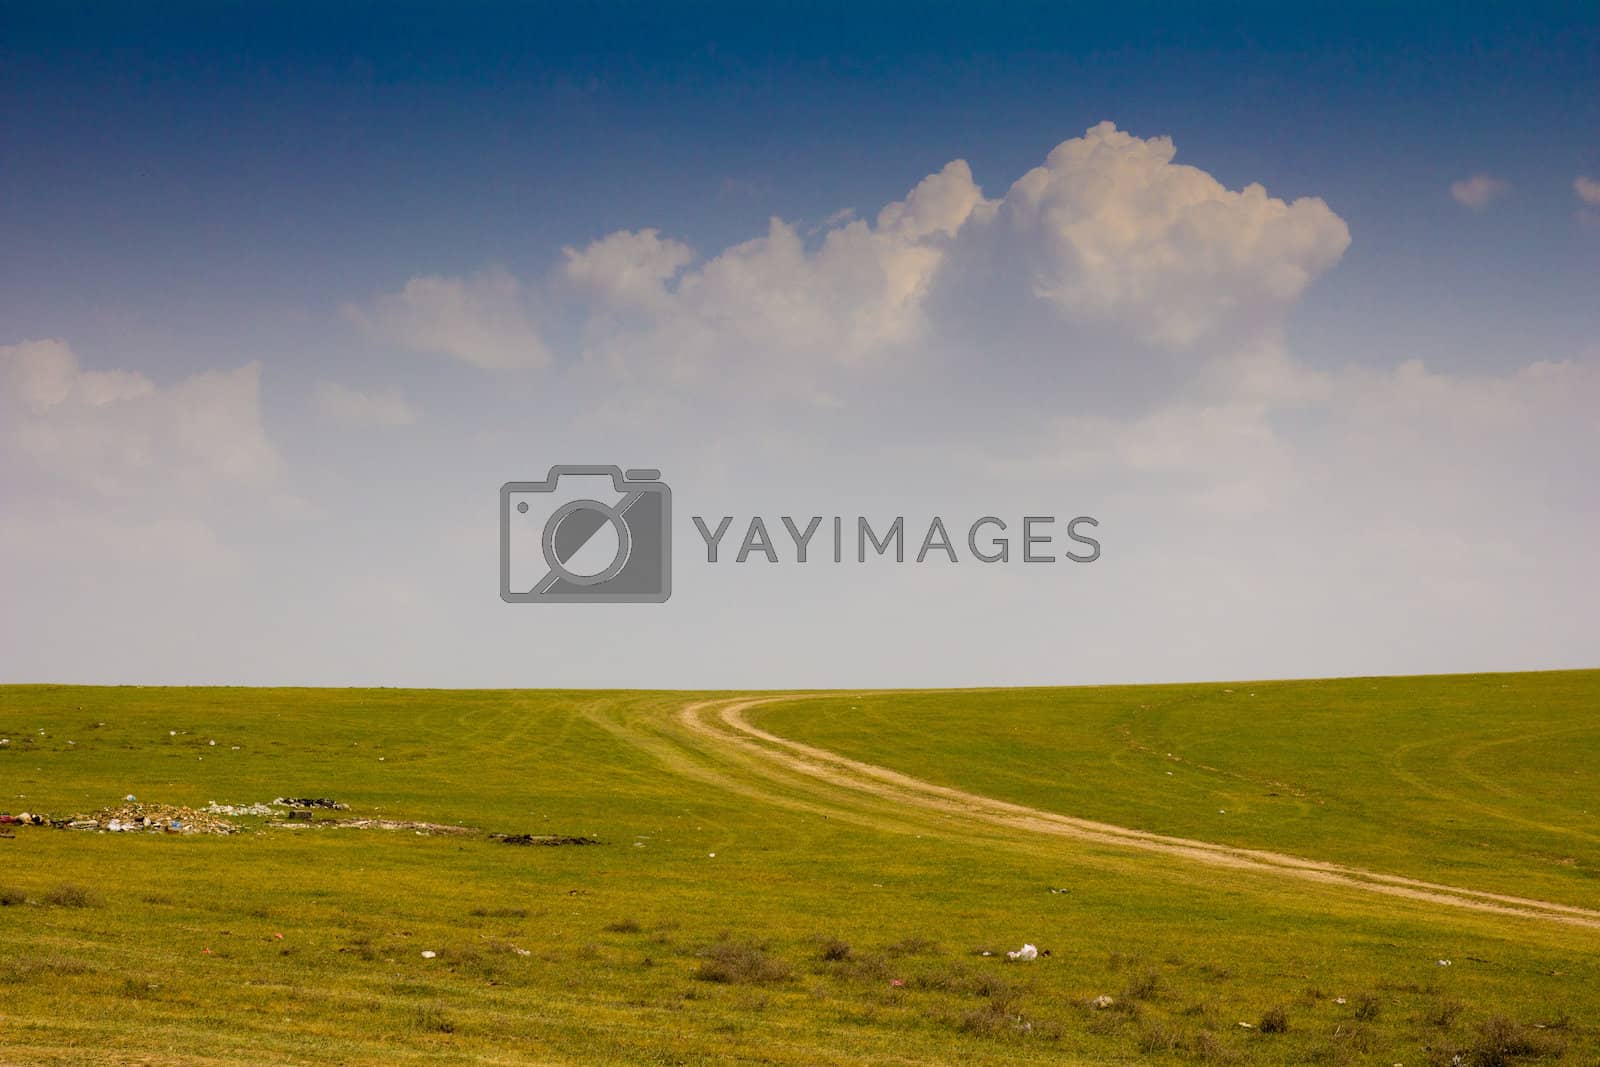 Royalty free image of green field with a road by schankz